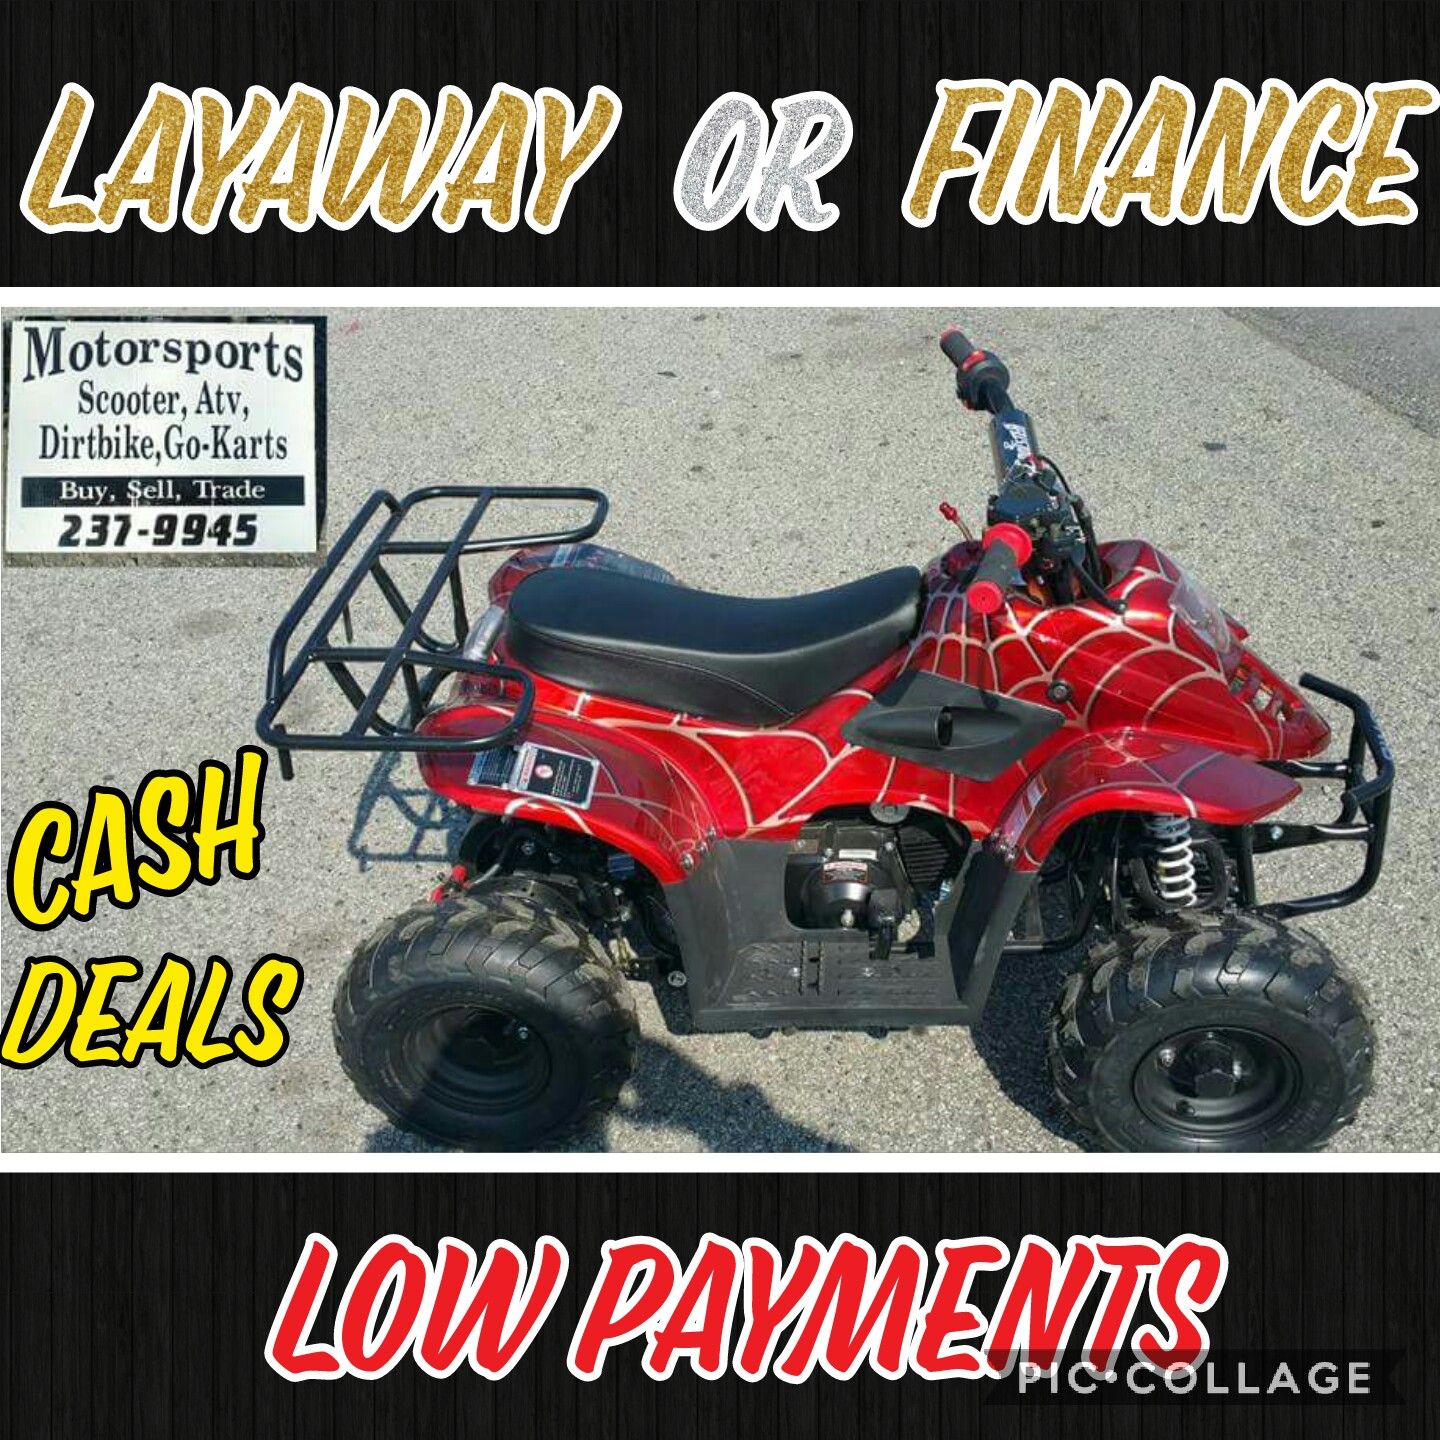 Finance a Four wheeler today many sizes to choose from